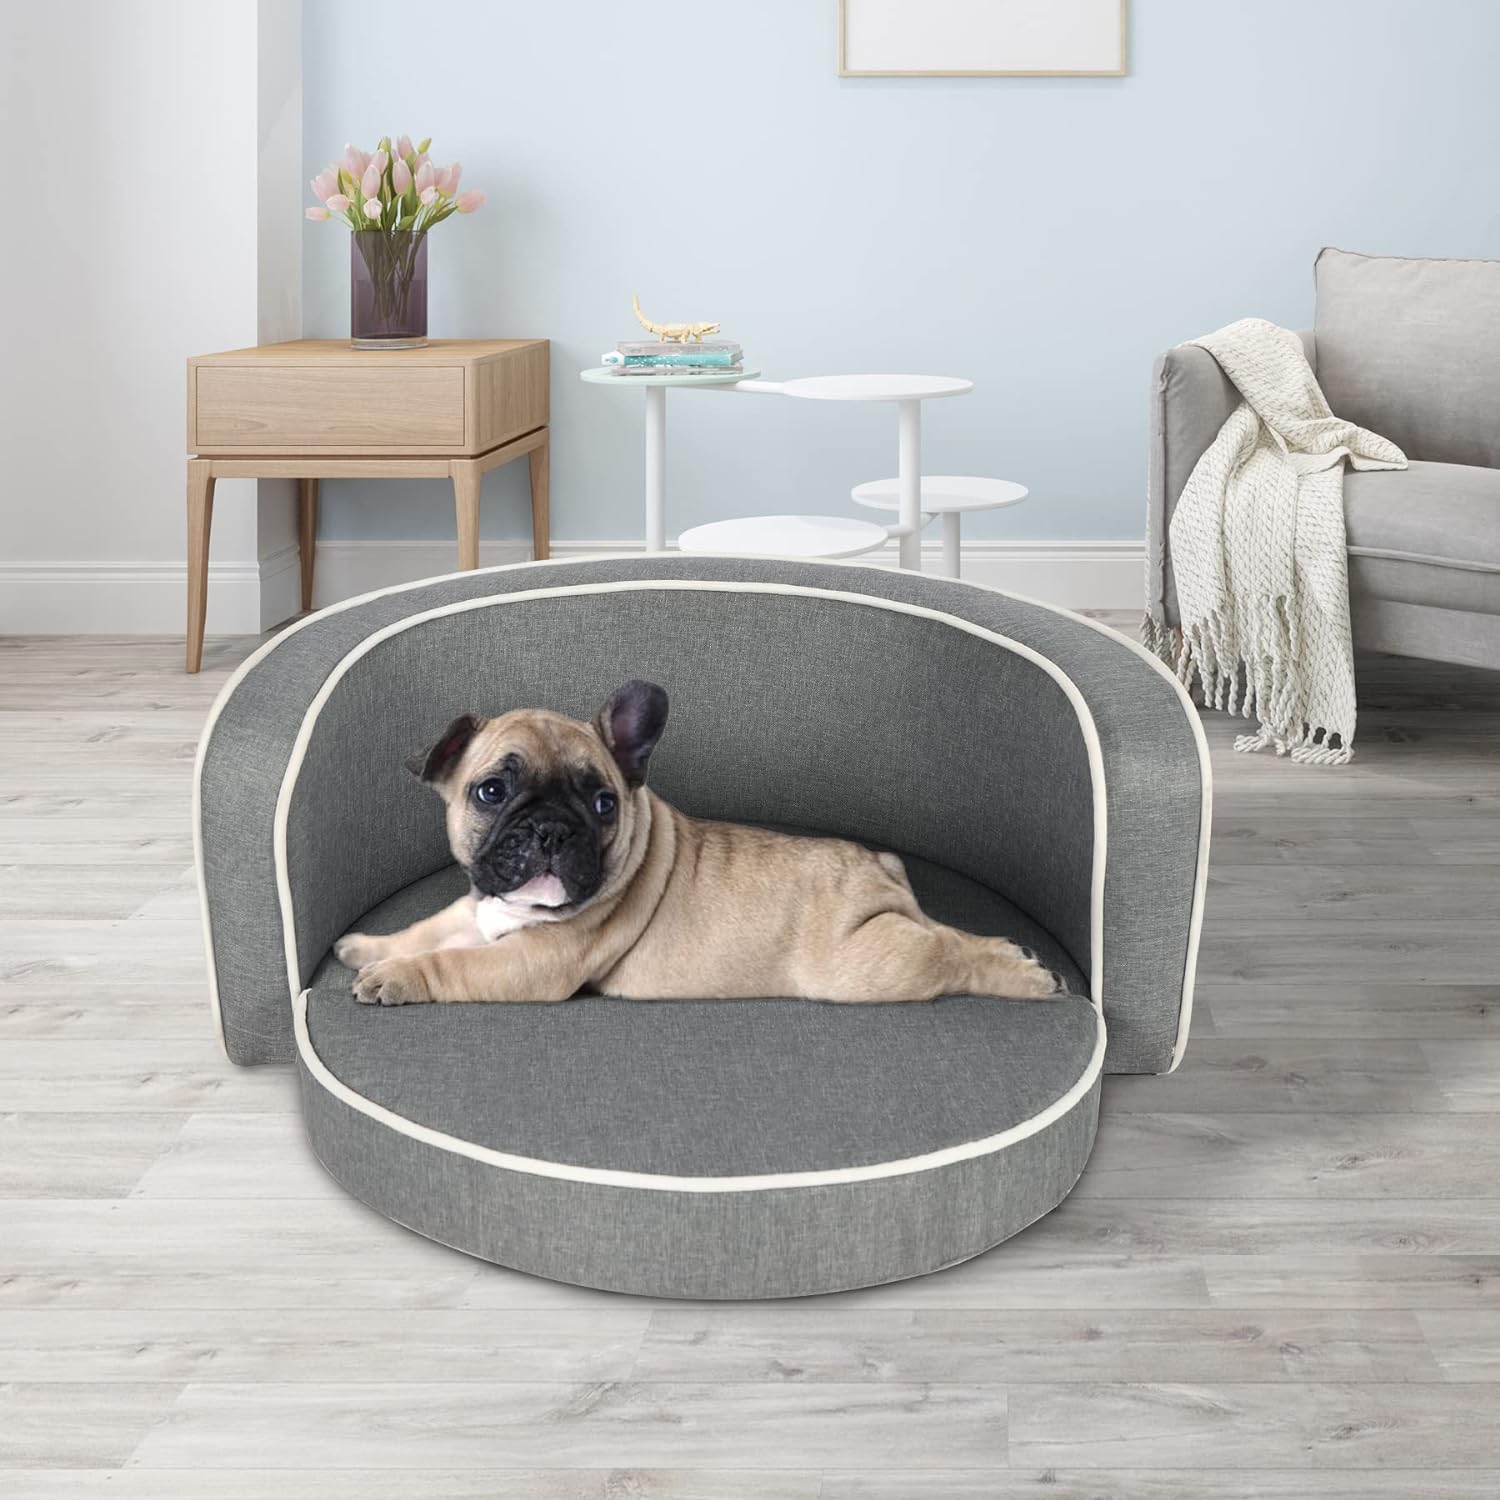 Stonehomy Pet Sofa Bed for Small Dogs